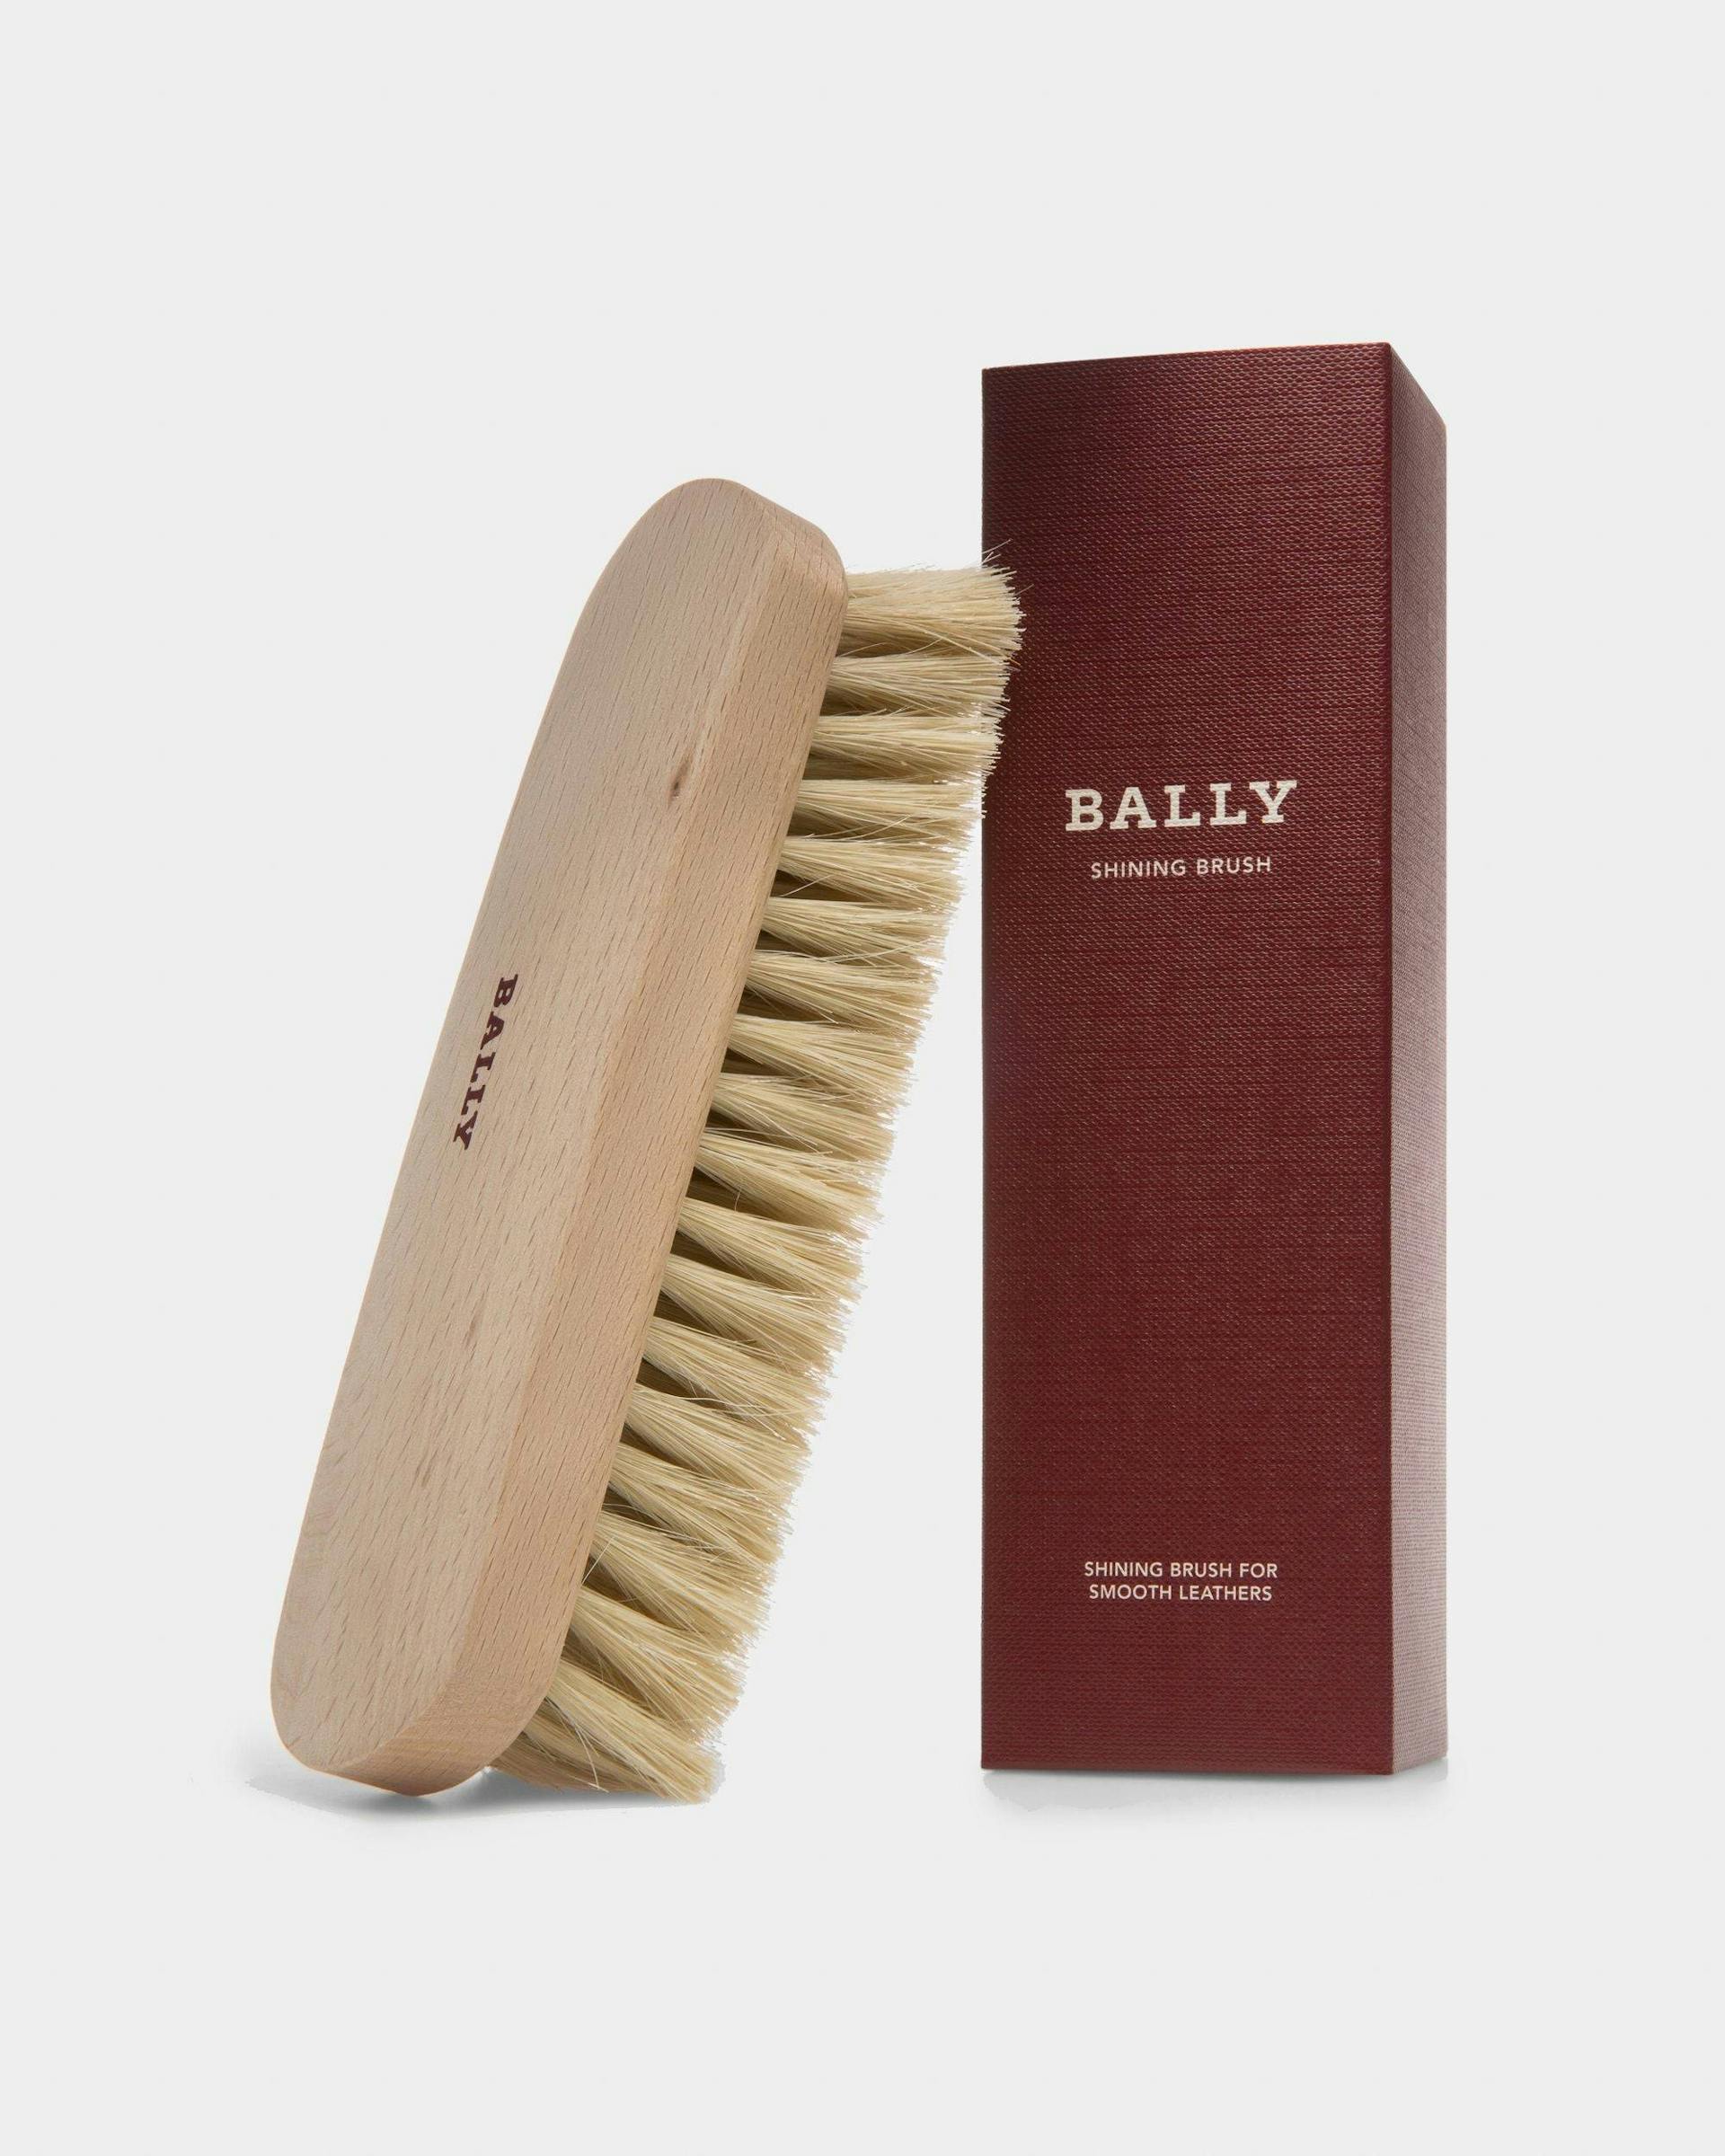 Shining Brush Shoe Care Accessory For Leather - Men's - Bally - 01